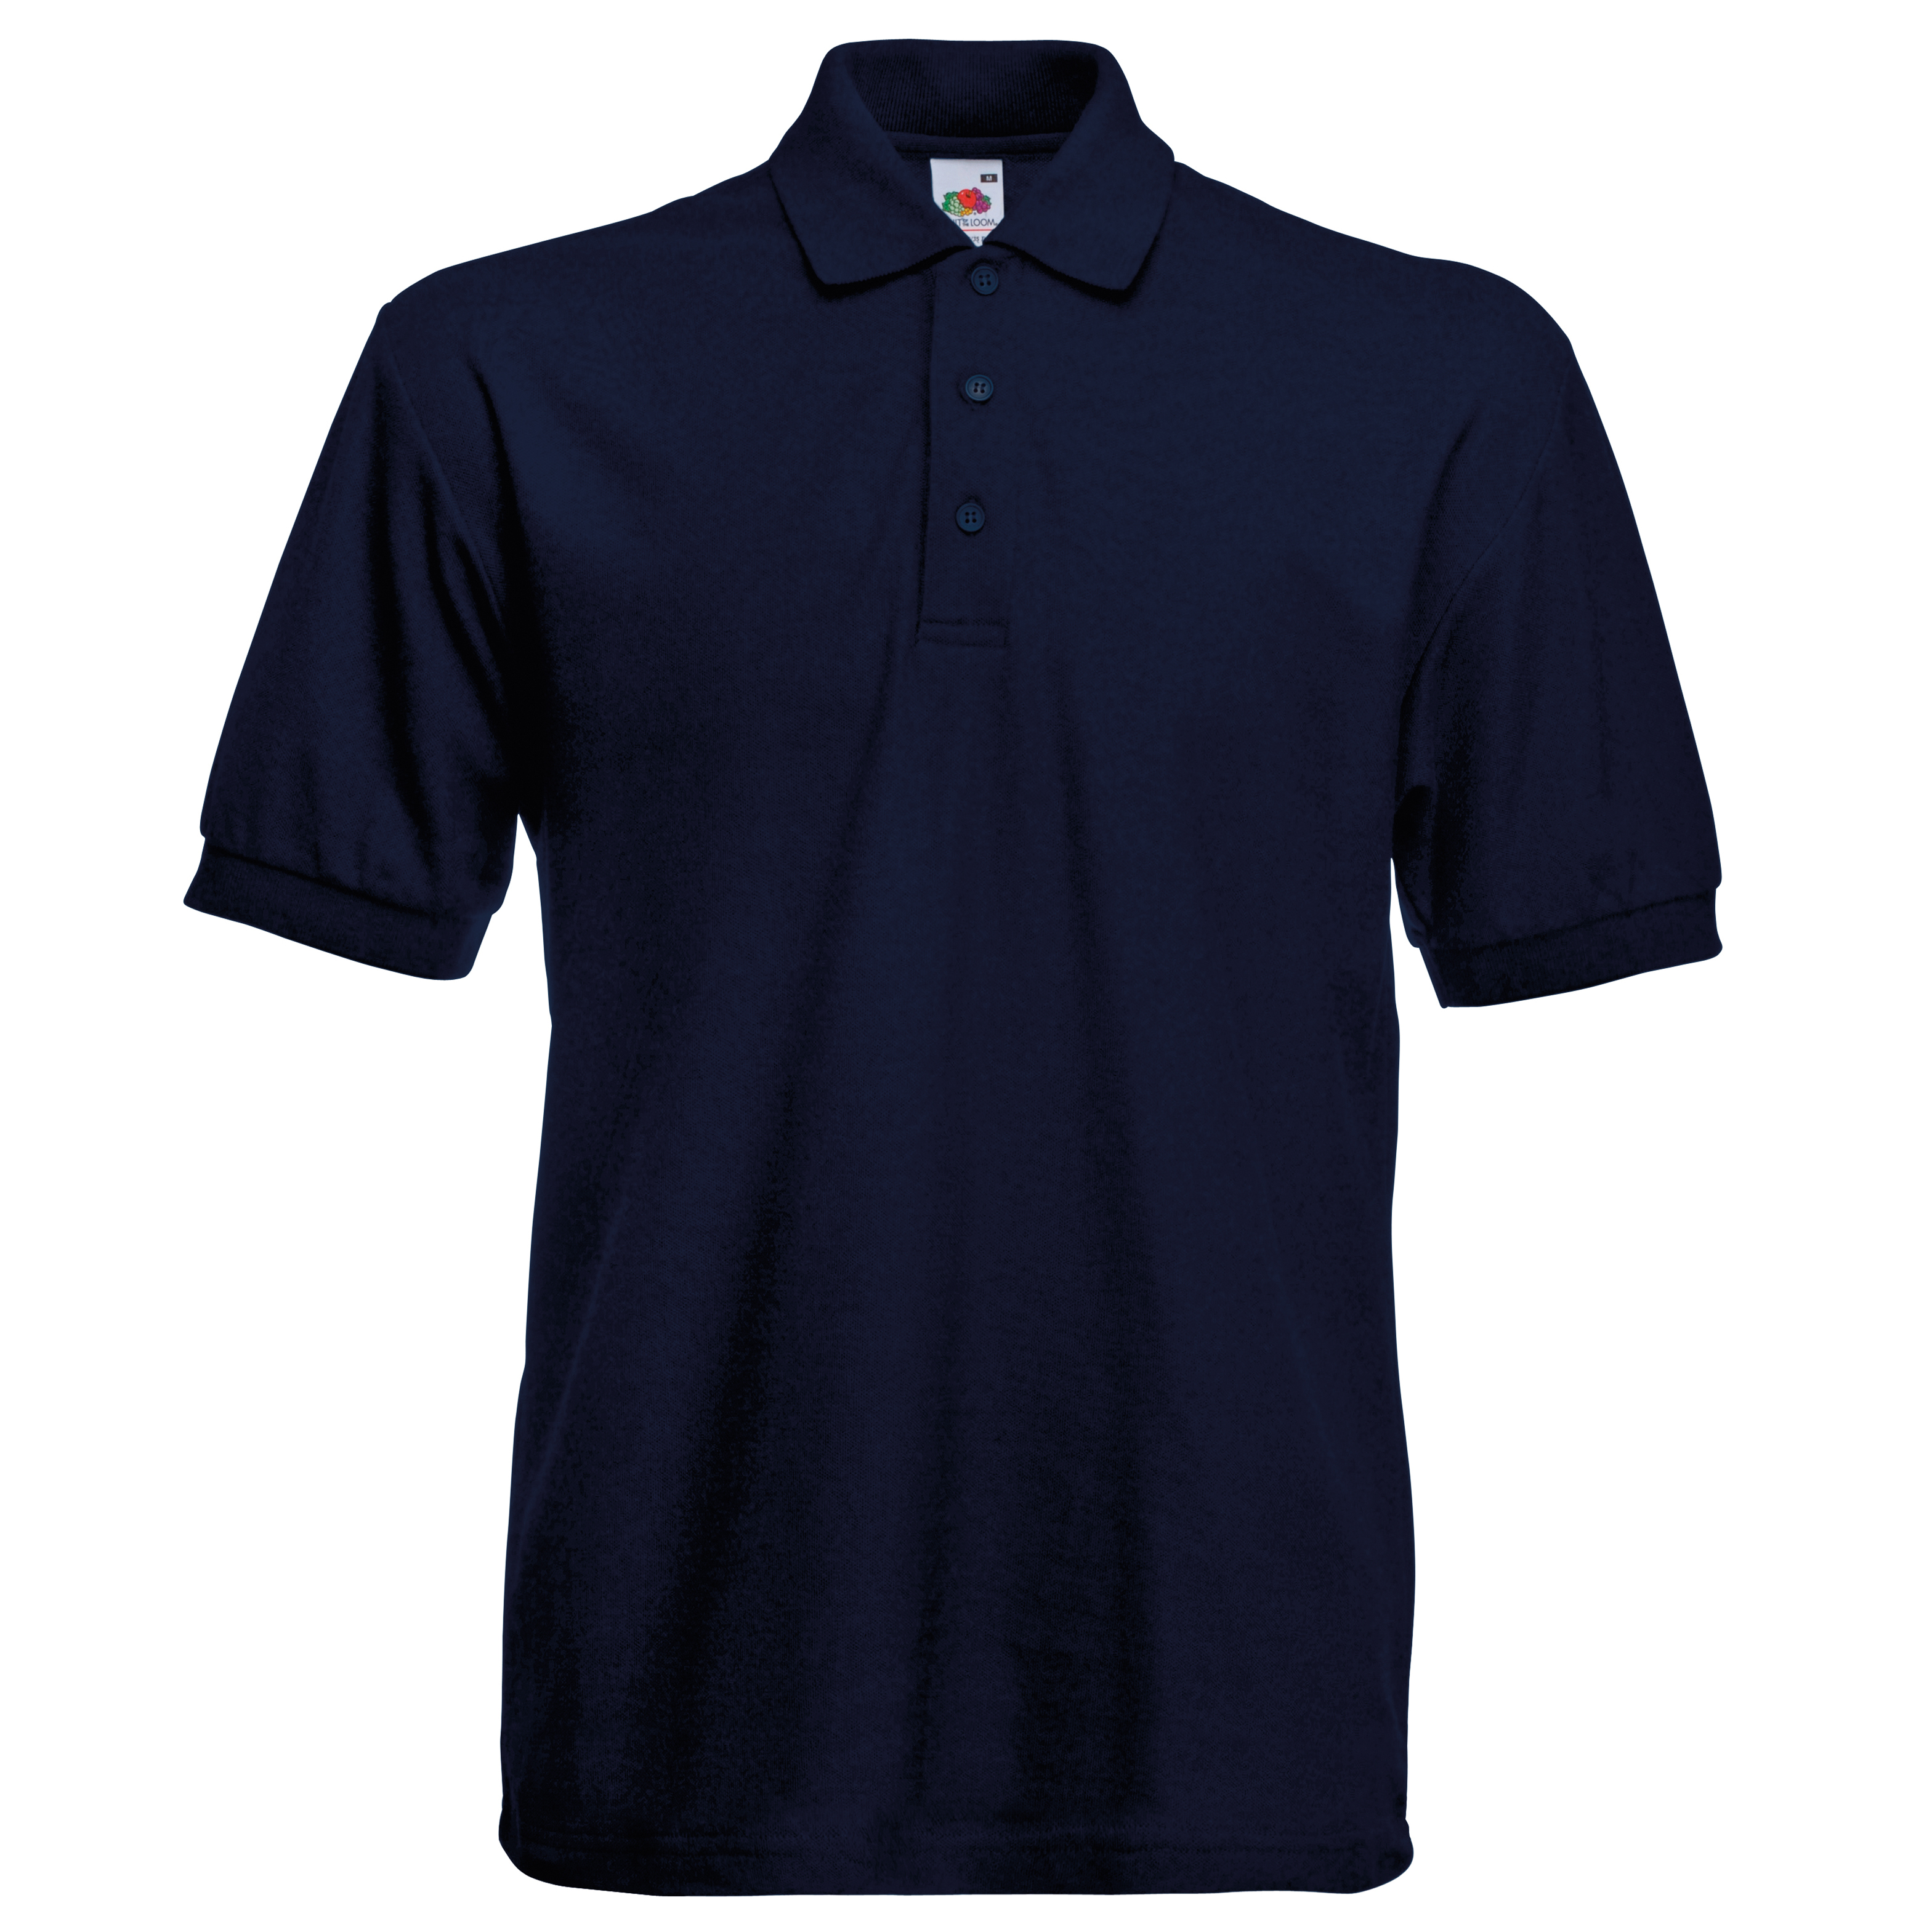 ax-httpswebsystems.s3.amazonaws.comtmp_for_downloadfruit-of-the-loom-heavyweight-65-35-polo-deep-navy.jpg